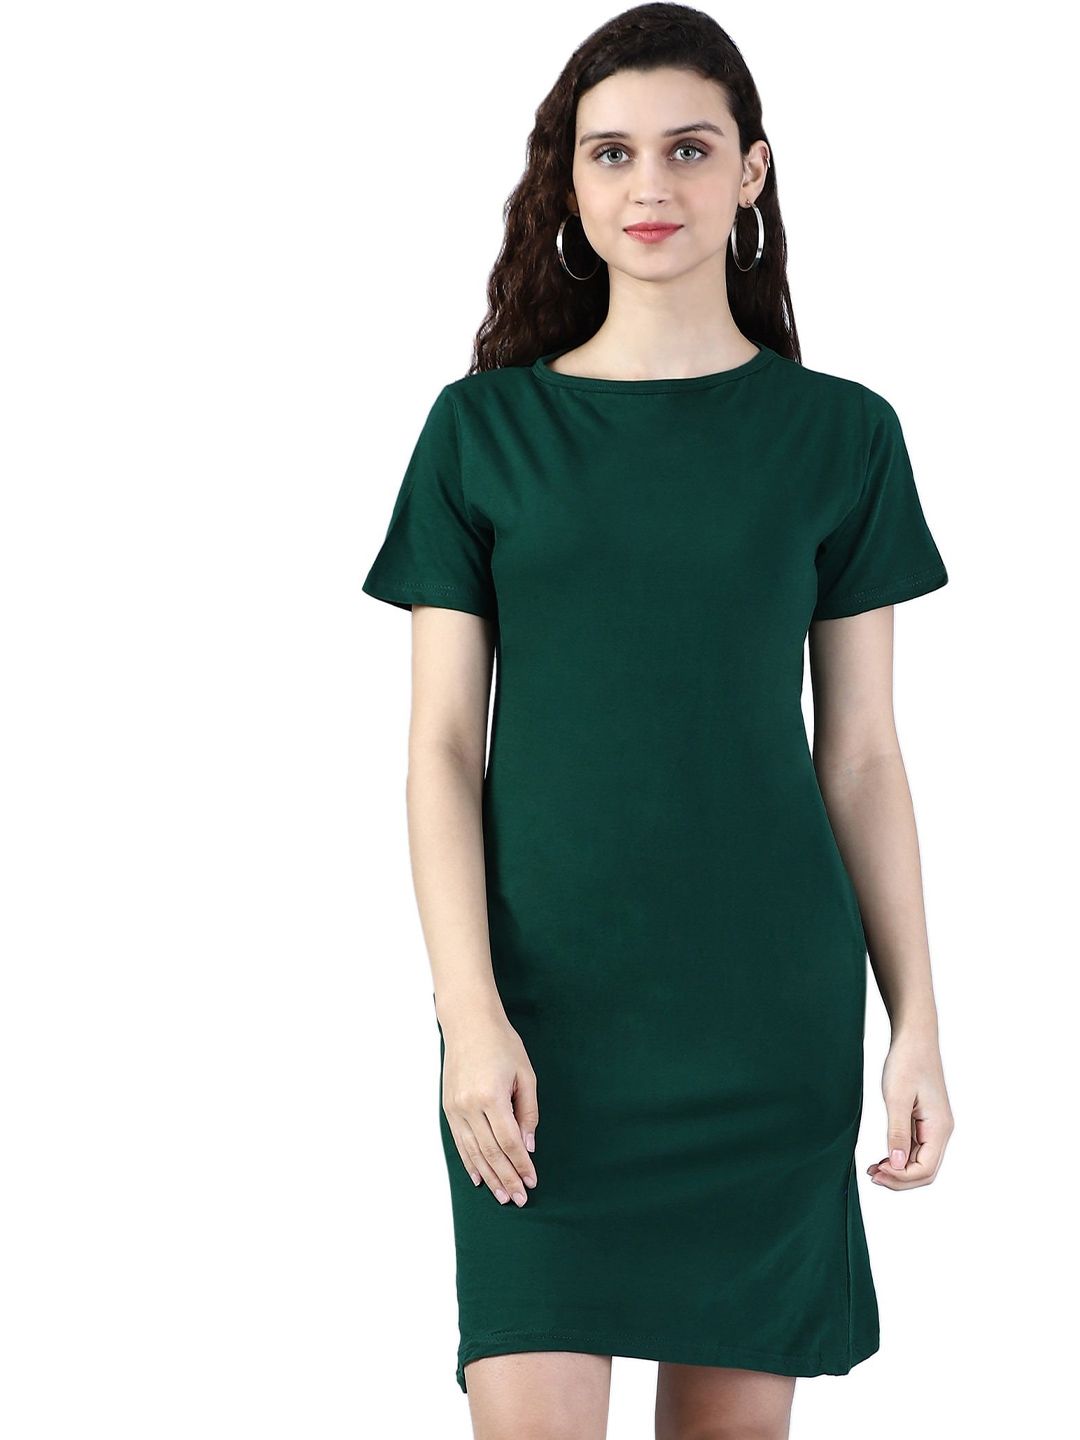 Next One Women Green Applique T-shirt Price in India